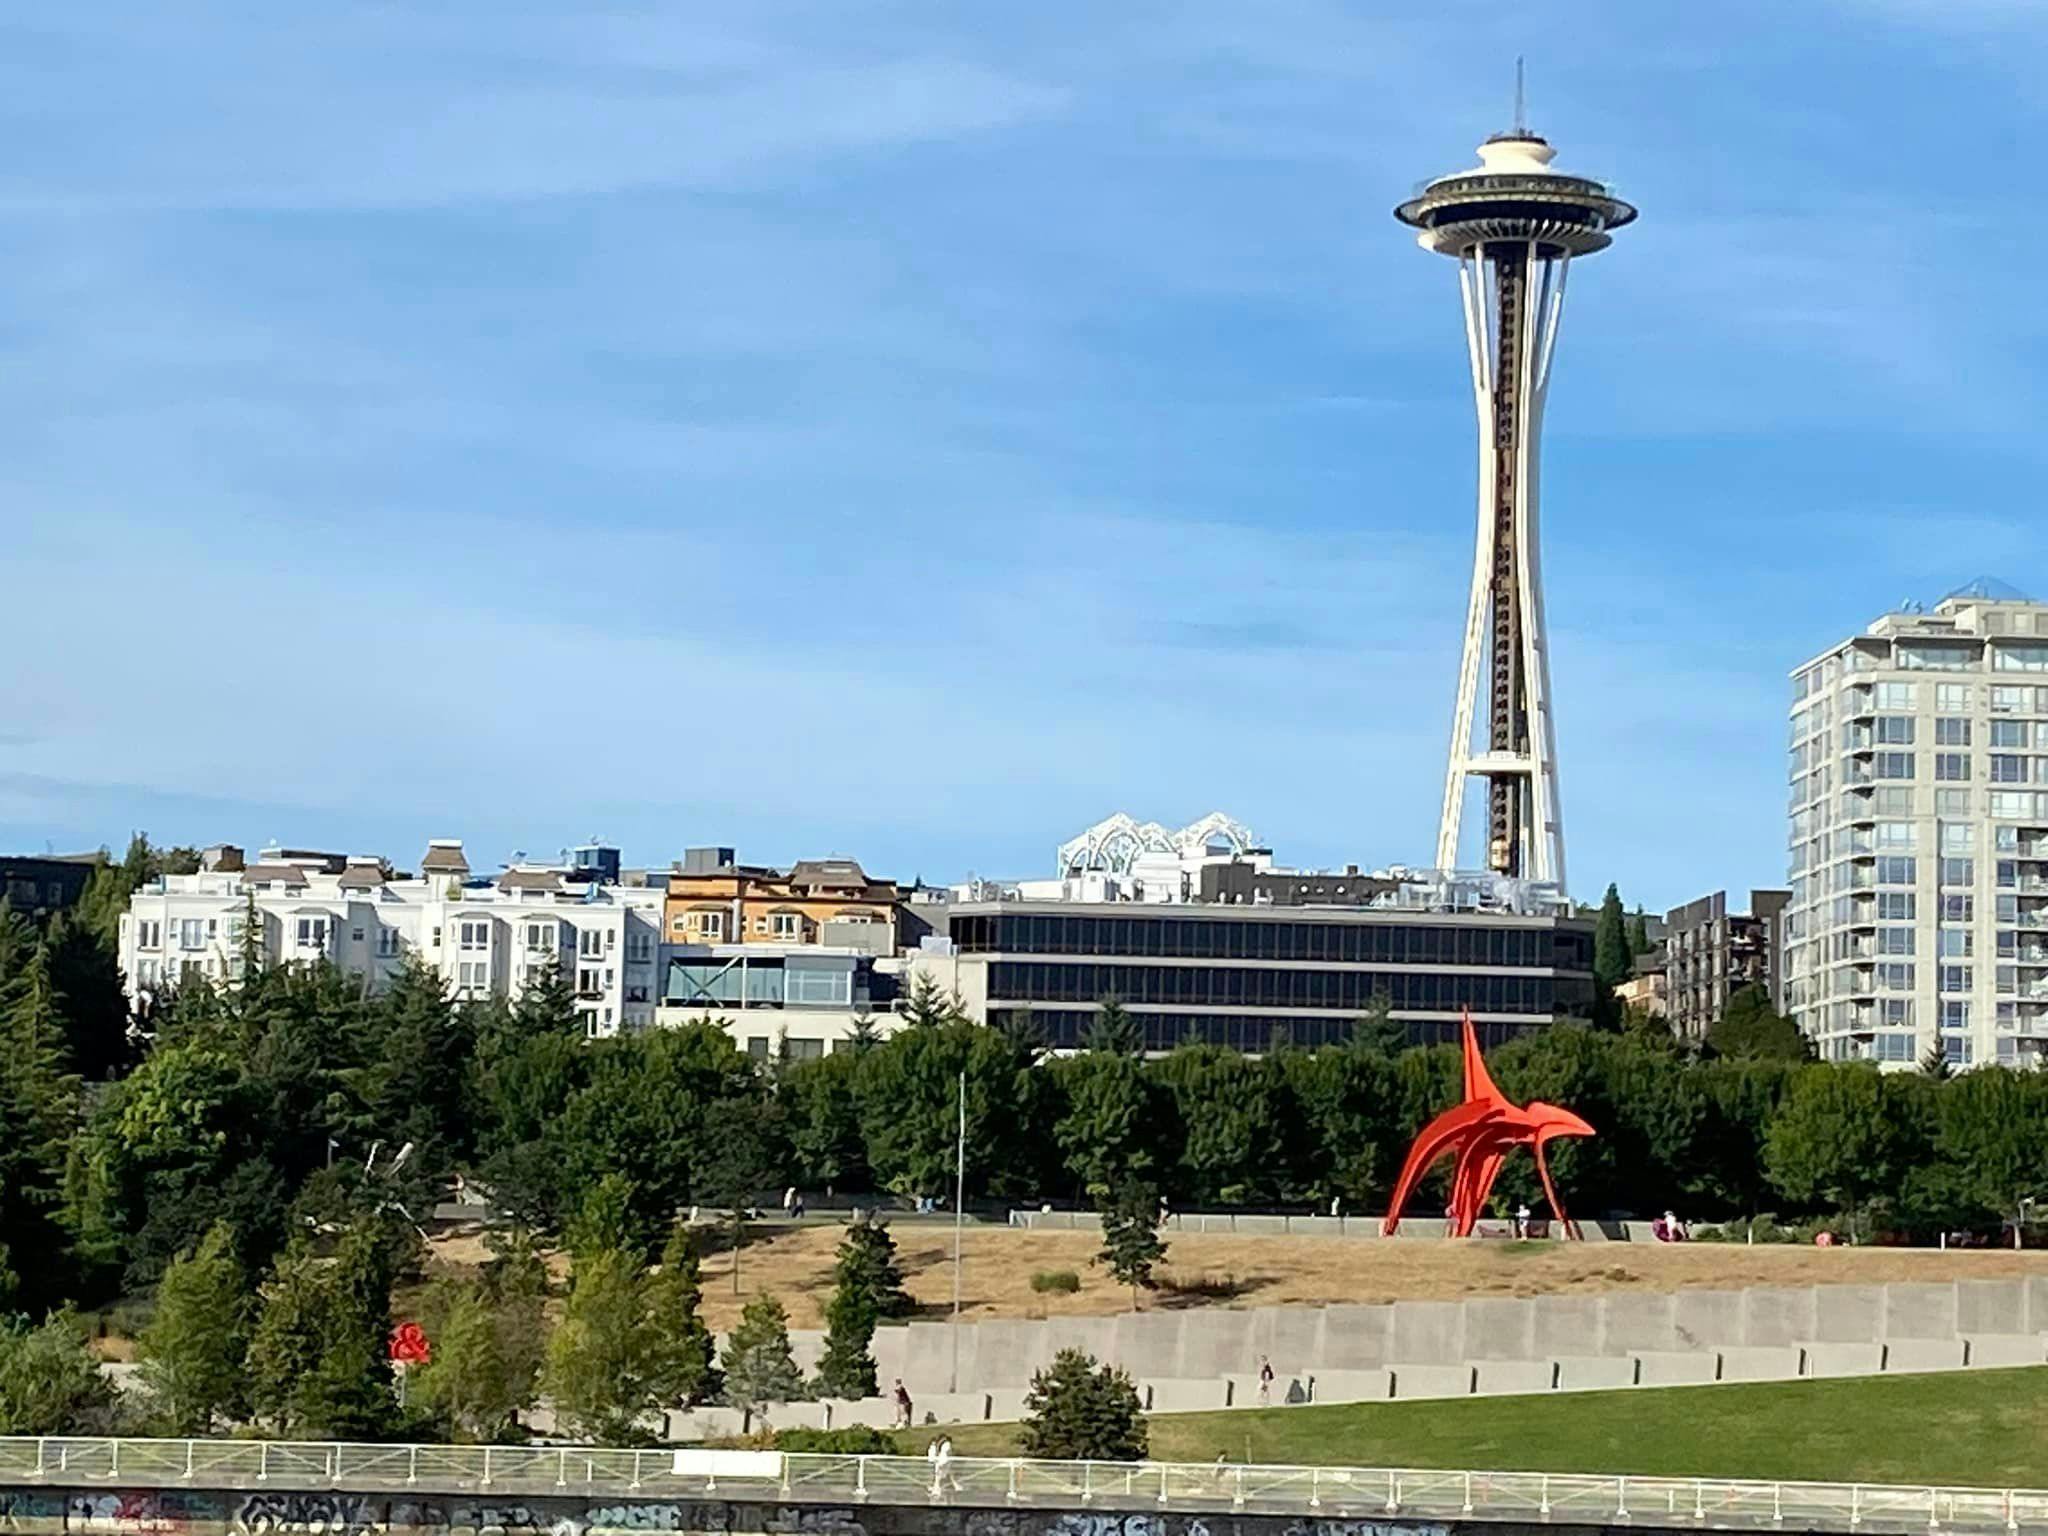 Seven from Seattle: Takeaways from the American Hospital Association Leadership Summit